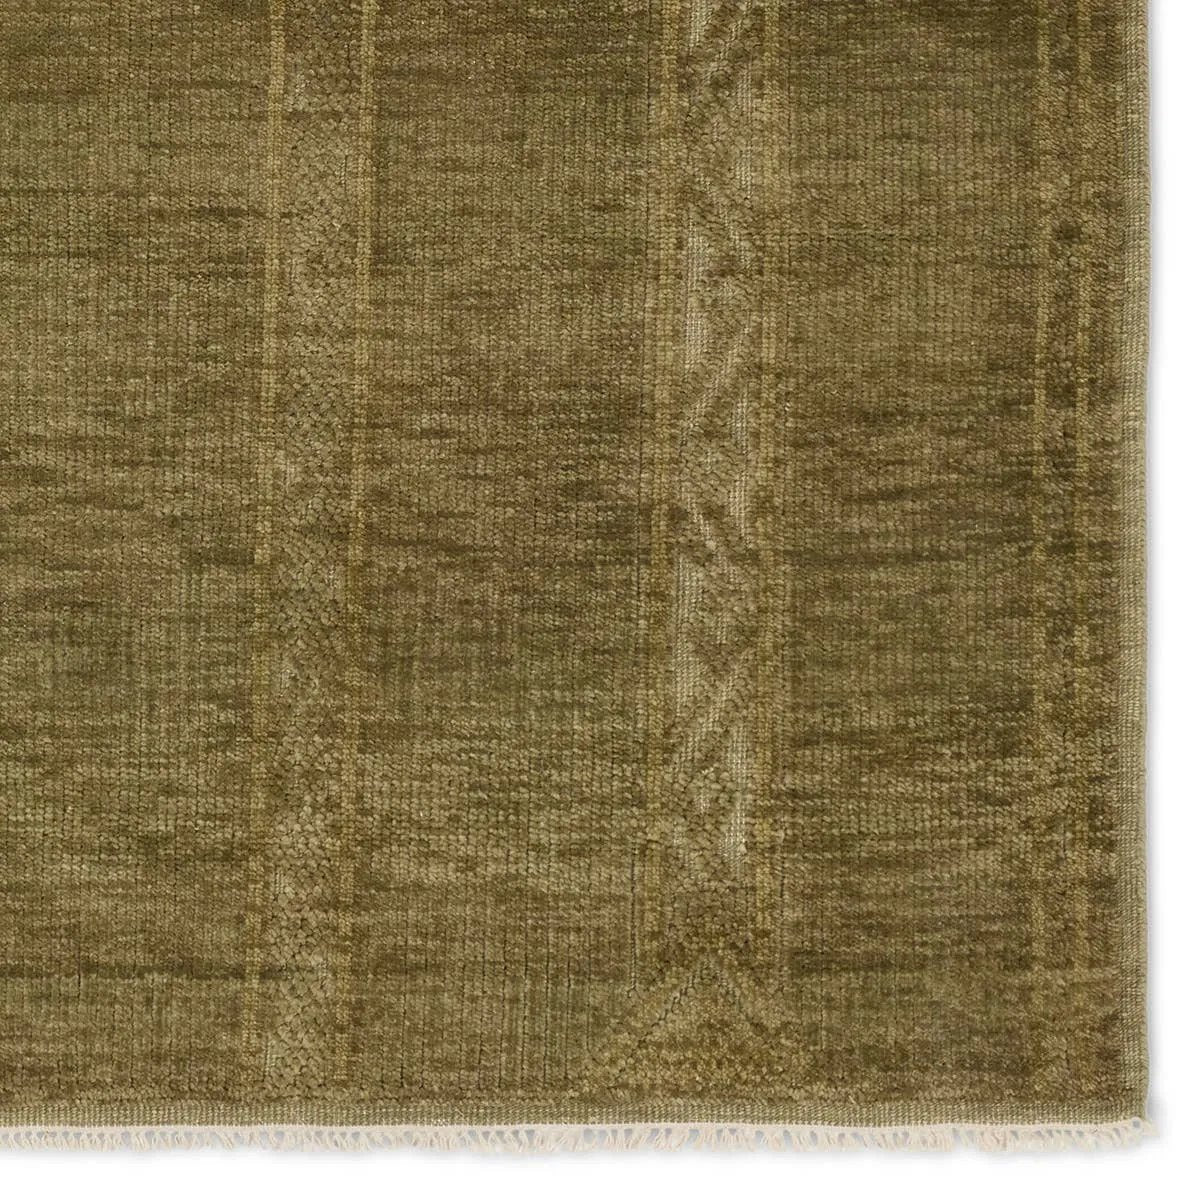 The hand-knotted Tapeten Achala features globally inspired designs that evoke a balance of tradition and modernity. The Achala pattern stuns with a high-low effect that distinguishes the olive green, geometric, striped pattern. Amethyst Home provides interior design, new home construction design consulting, vintage area rugs, and lighting in the Kansas City metro area.